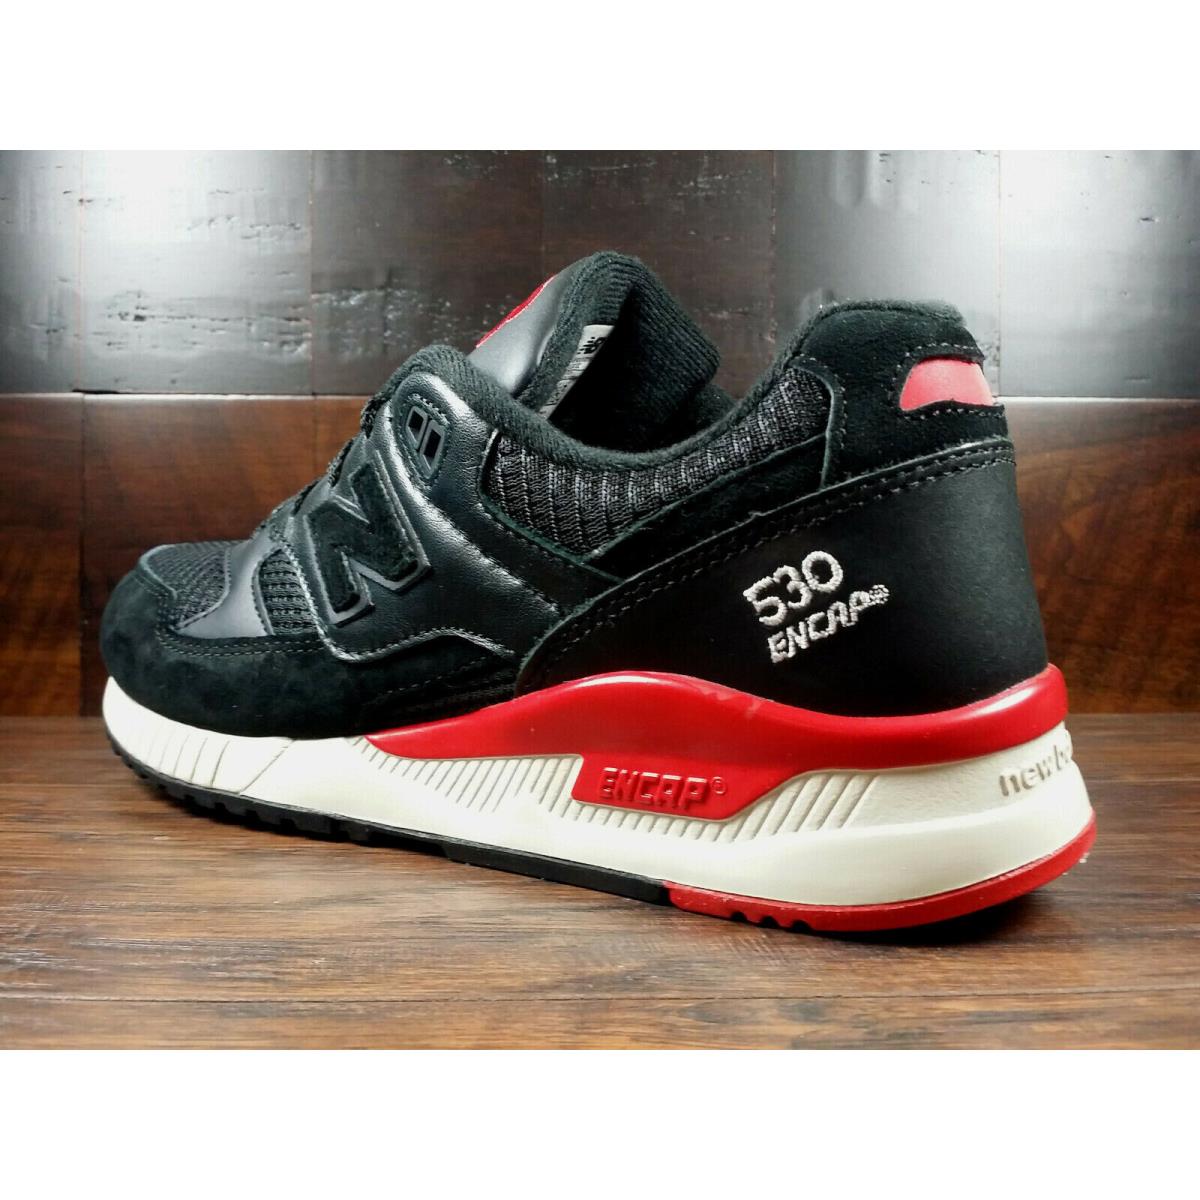 New Balance shoes  - Black / Red 1